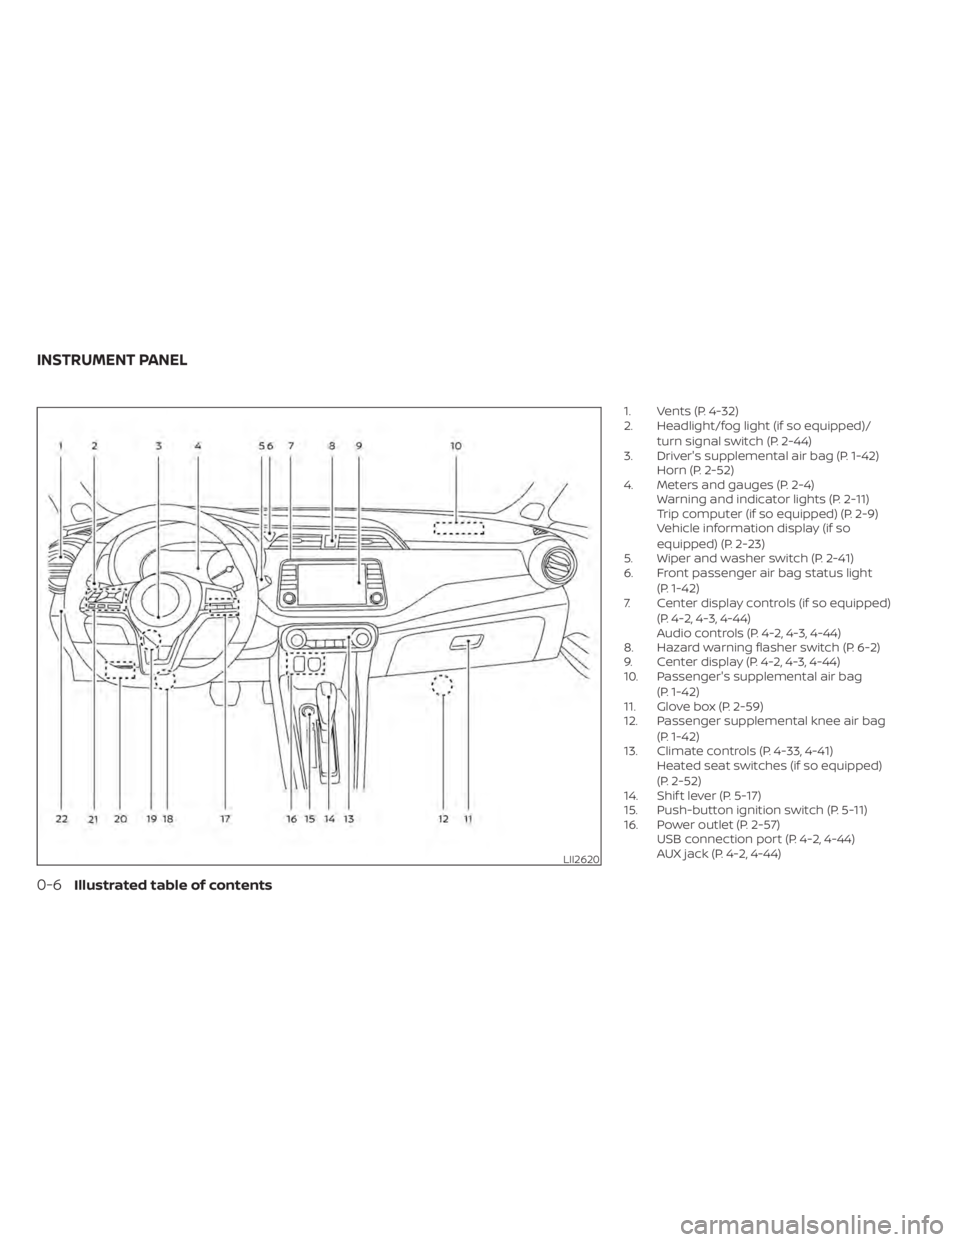 NISSAN KICKS 2021 User Guide 1. Vents (P. 4-32)
2. Headlight/fog light (if so equipped)/turn signal switch (P. 2-44)
3. Driver's supplemental air bag (P. 1-42) Horn (P. 2-52)
4. Meters and gauges (P. 2-4) Warning and indicato